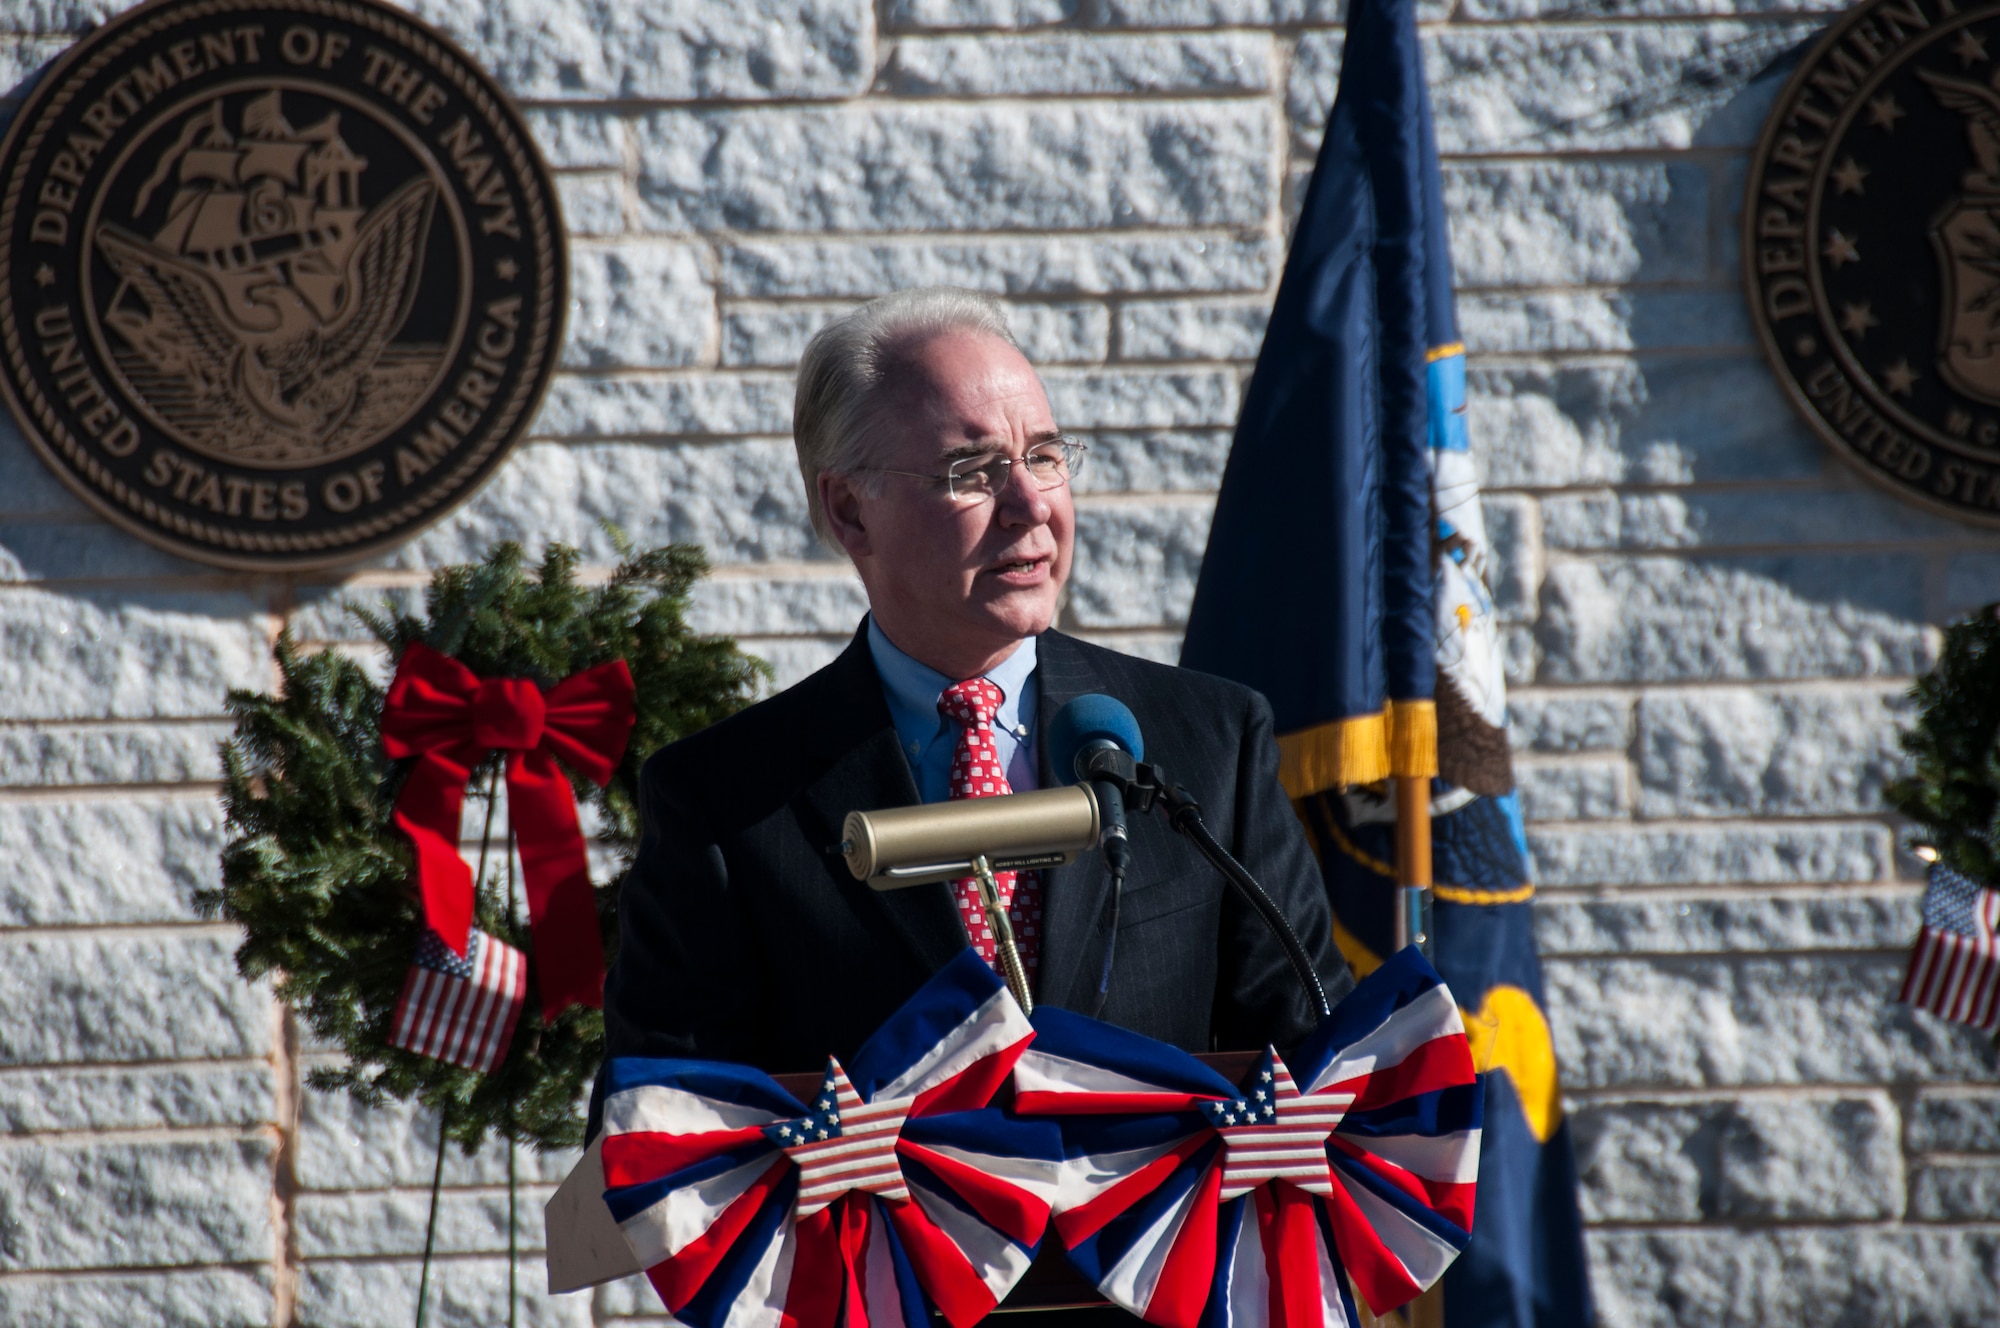 Rep. Tom Price (R-GA) speaks to volunteers at the Wreaths Across America ceremony at Georgia National Cemetery Dec. 13, 2014. Price serves on the House Committee on Ways and Means, as well as the House Committee on Education and the Workforce. (U.S. Air Force photo/Senior Airman Daniel Phelps)